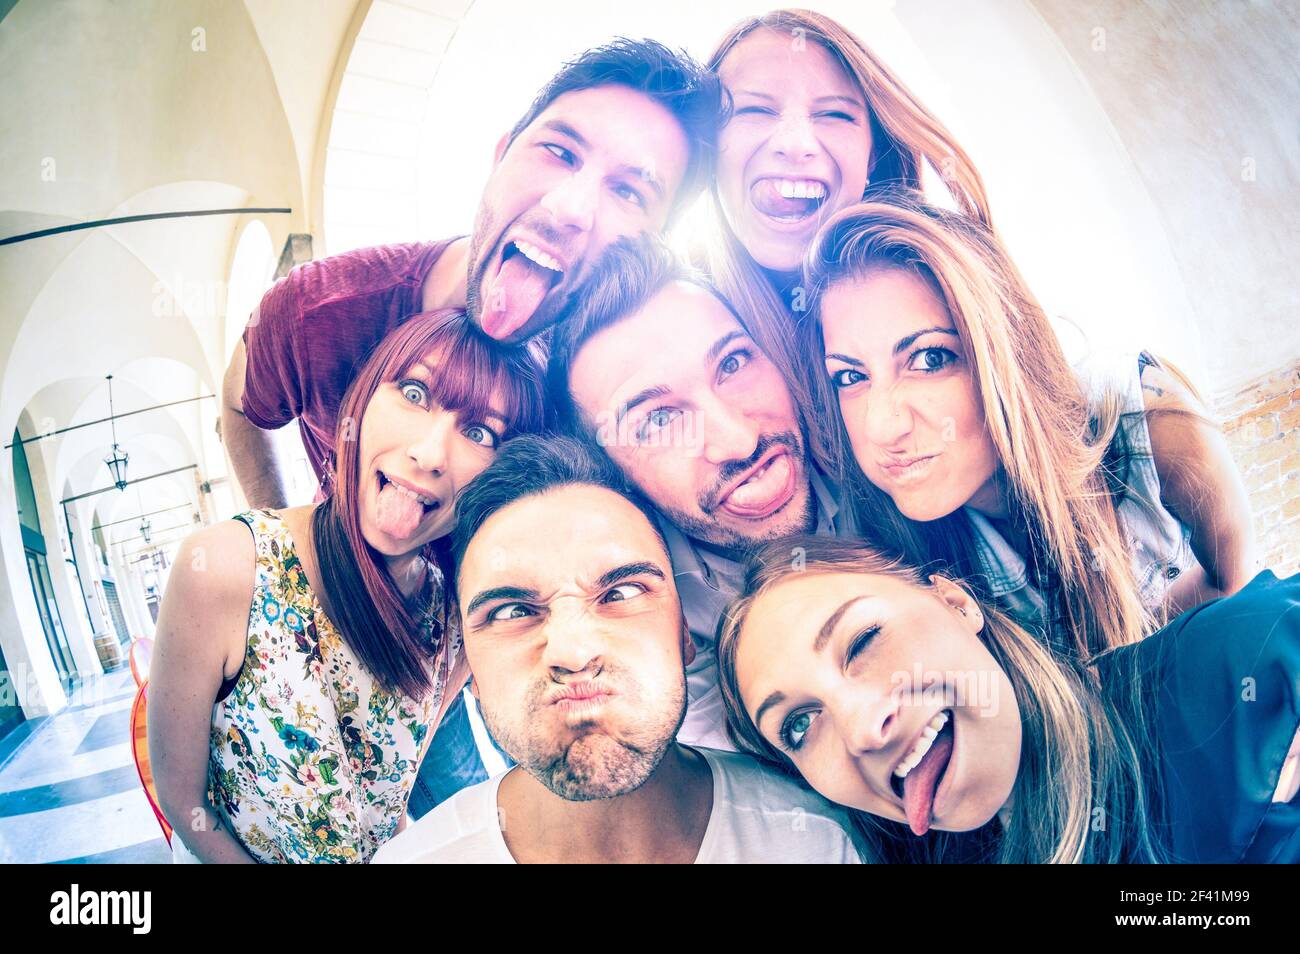 Best friends taking selfie outdoors with back lighting - Happy friendship concept with young people having fun together - Cold vintage filtered look Stock Photo